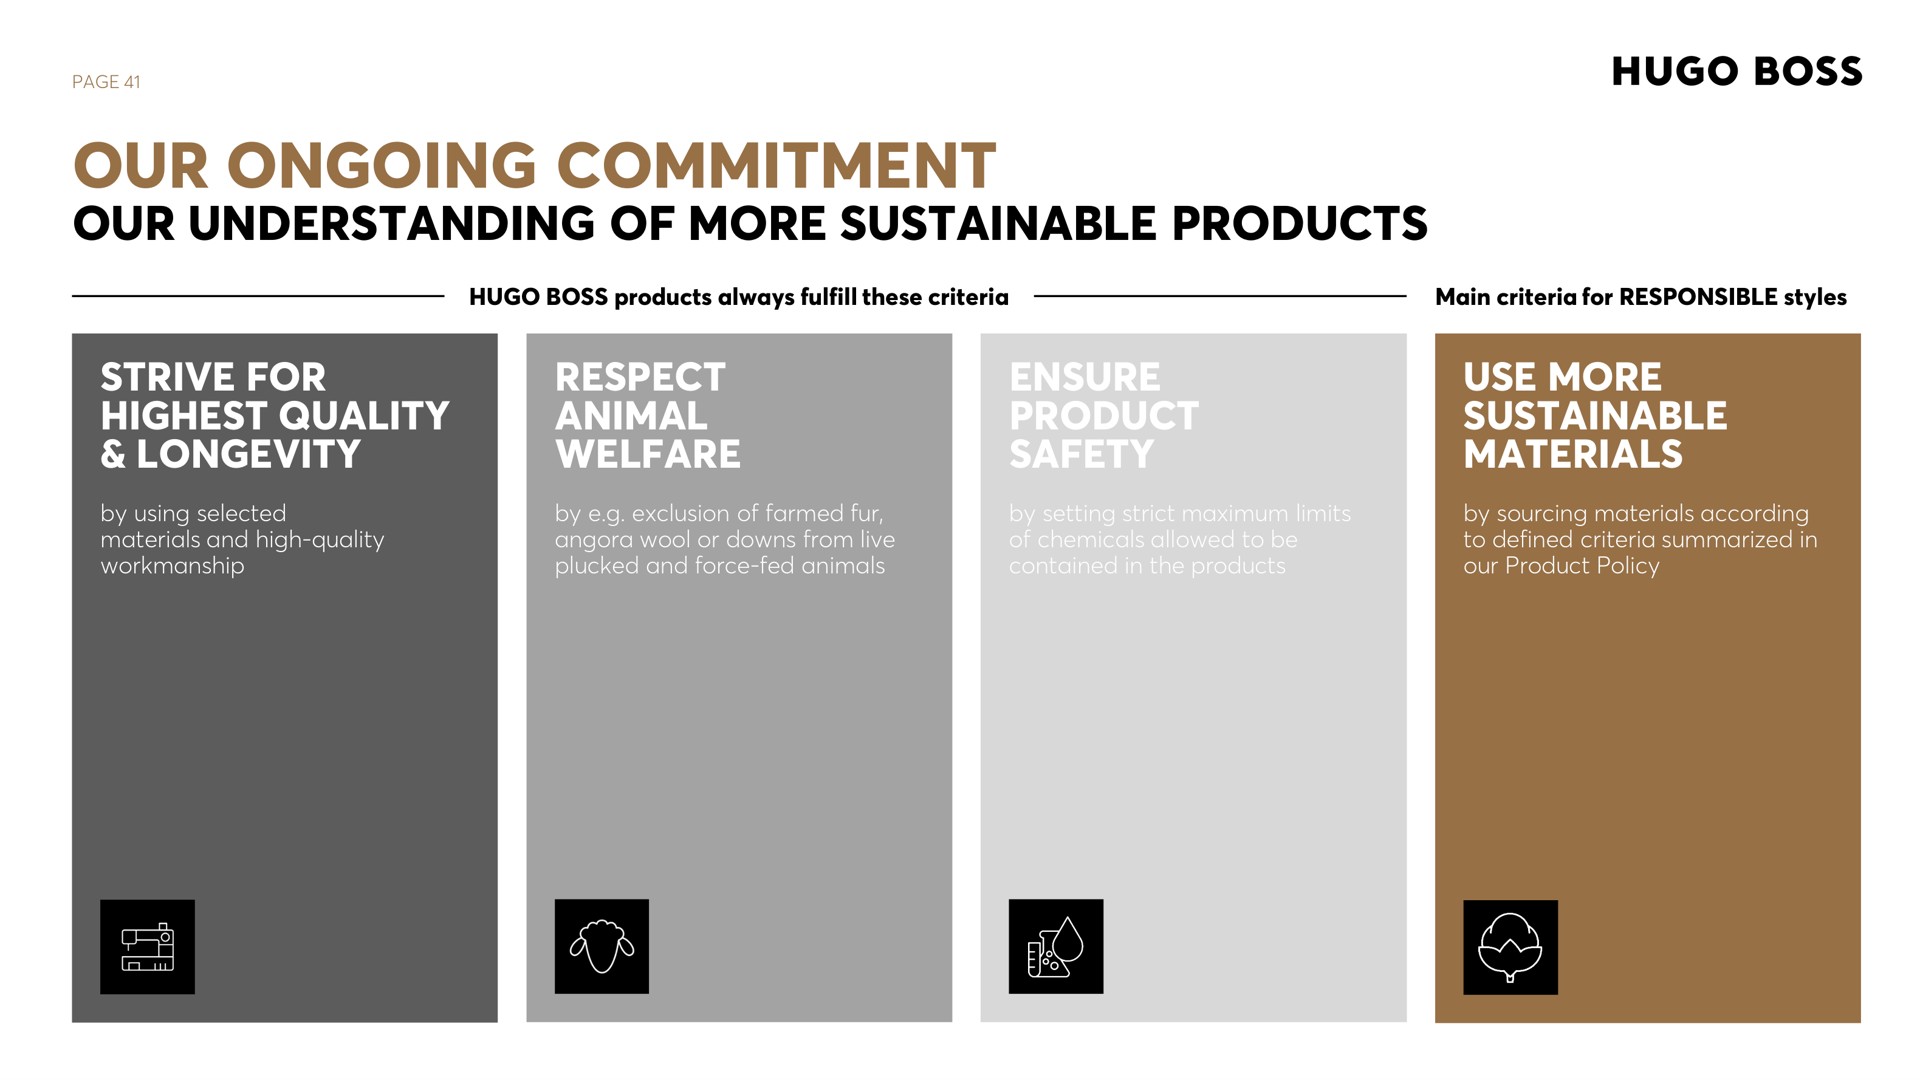 page our ongoing commitment our understanding of more sustainable products boss products always fulfill these criteria main criteria for responsible styles strive for highest quality longevity respect animal welfare ensure product safety use more sustainable materials by using selected materials and high quality workmanship by exclusion of farmed fur wool or downs from live plucked and force fed animals by setting strict maximum limits of chemicals allowed to be contained in the products by sourcing materials according to defined criteria summarized in our product policy on | Hugo Boss